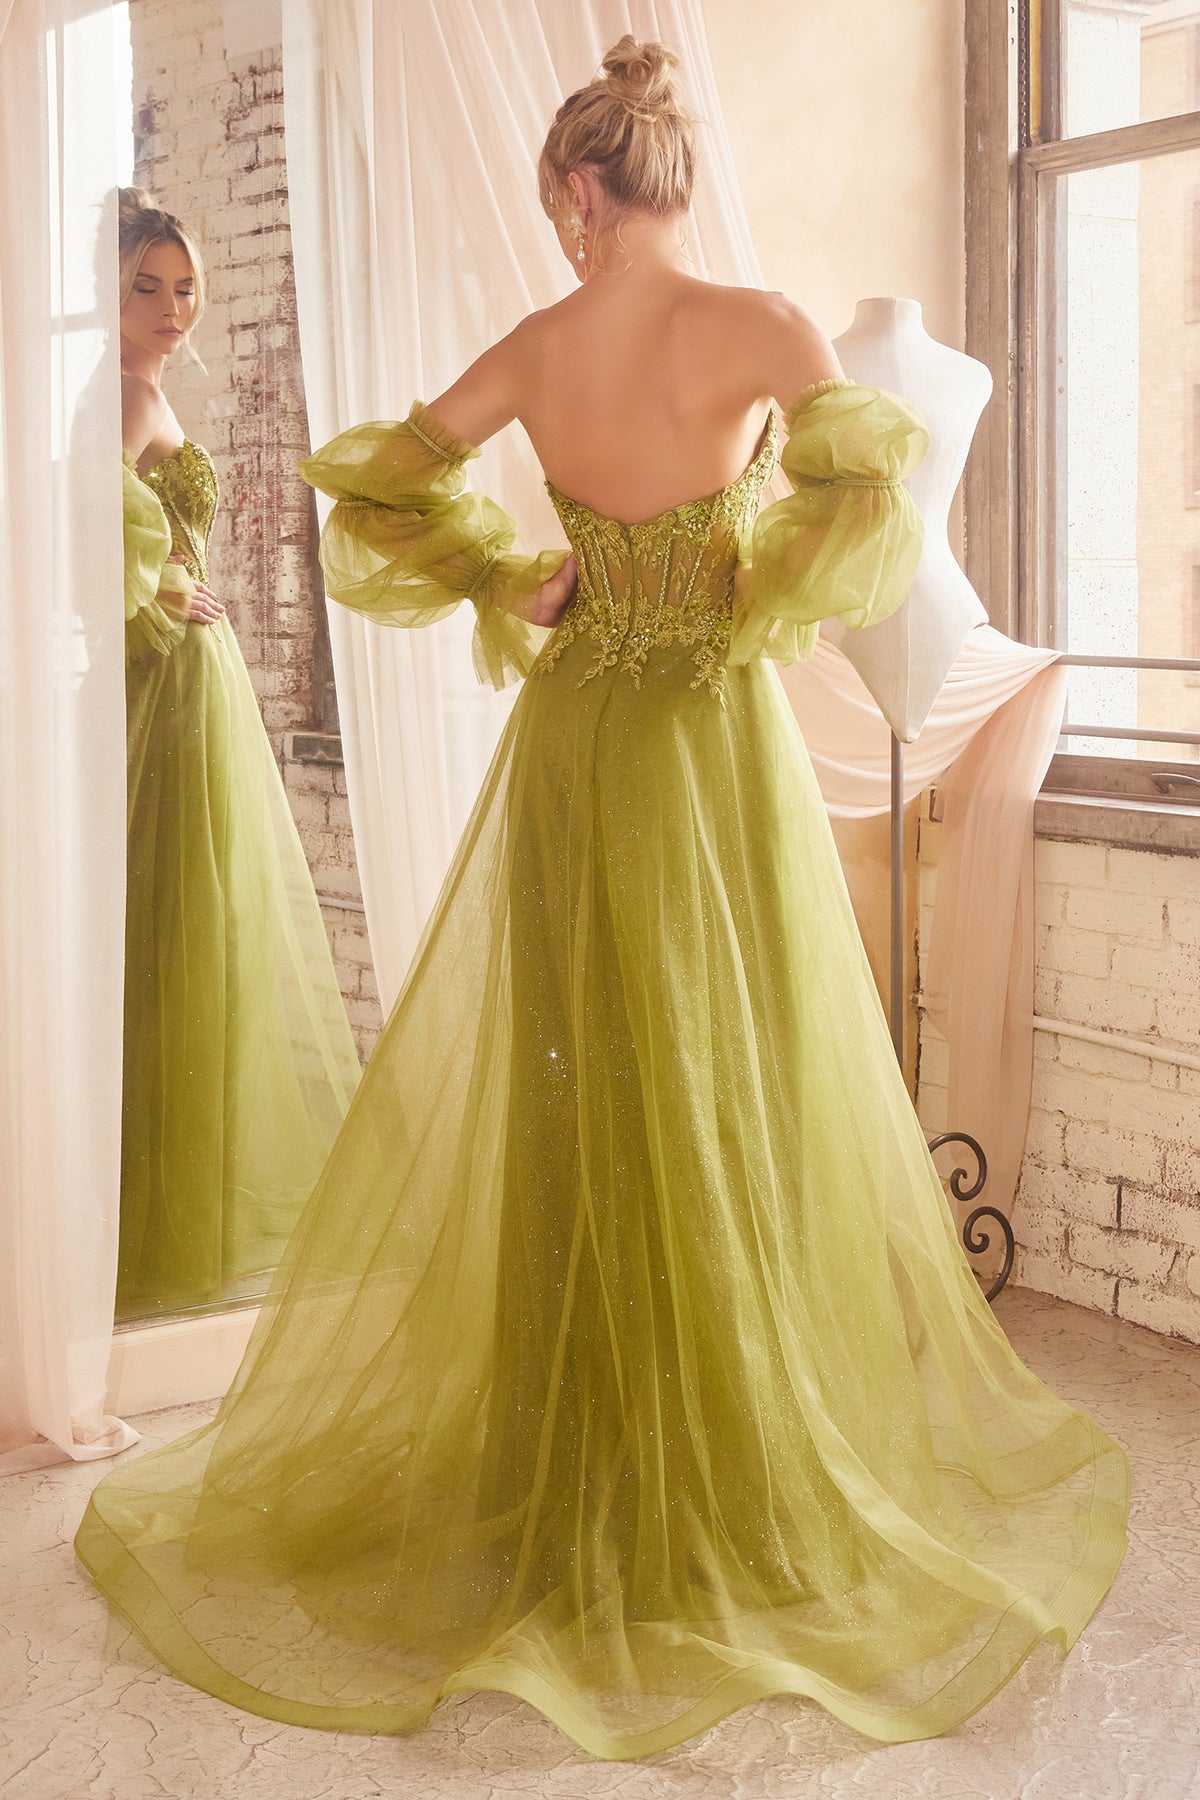 Exquisite Embroidered Tulle Gown With Sleeves